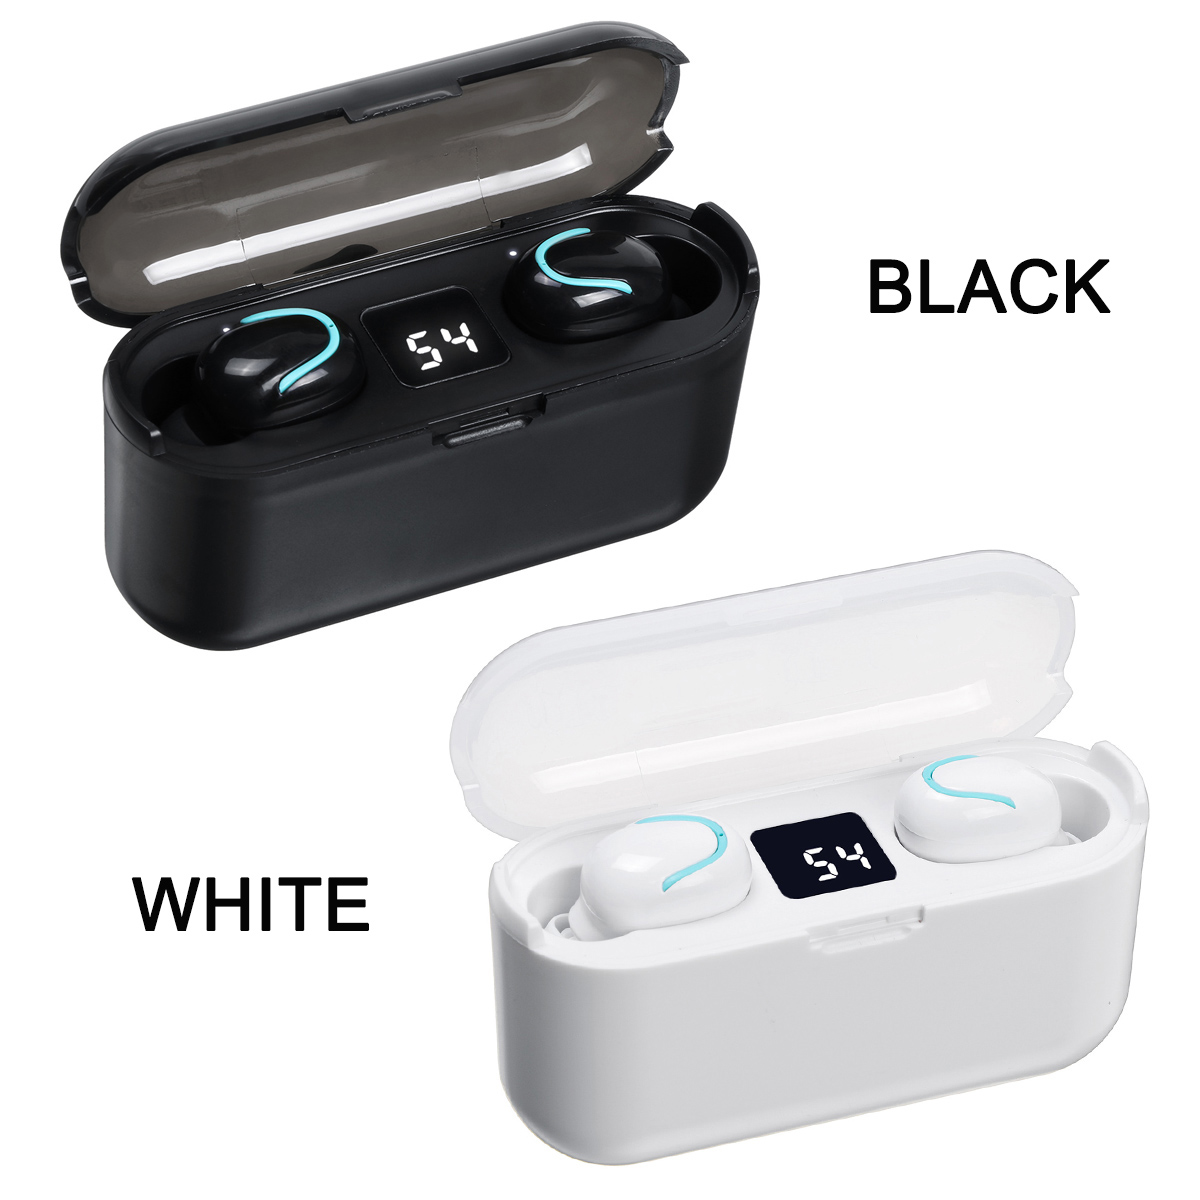 Bakeey-A13-TWS-bluetooth-Earbuds-LED-Display-Fingerprint-Touch-Sport-Headset-Noise-Cancelling-HIFI-B-1747841-7